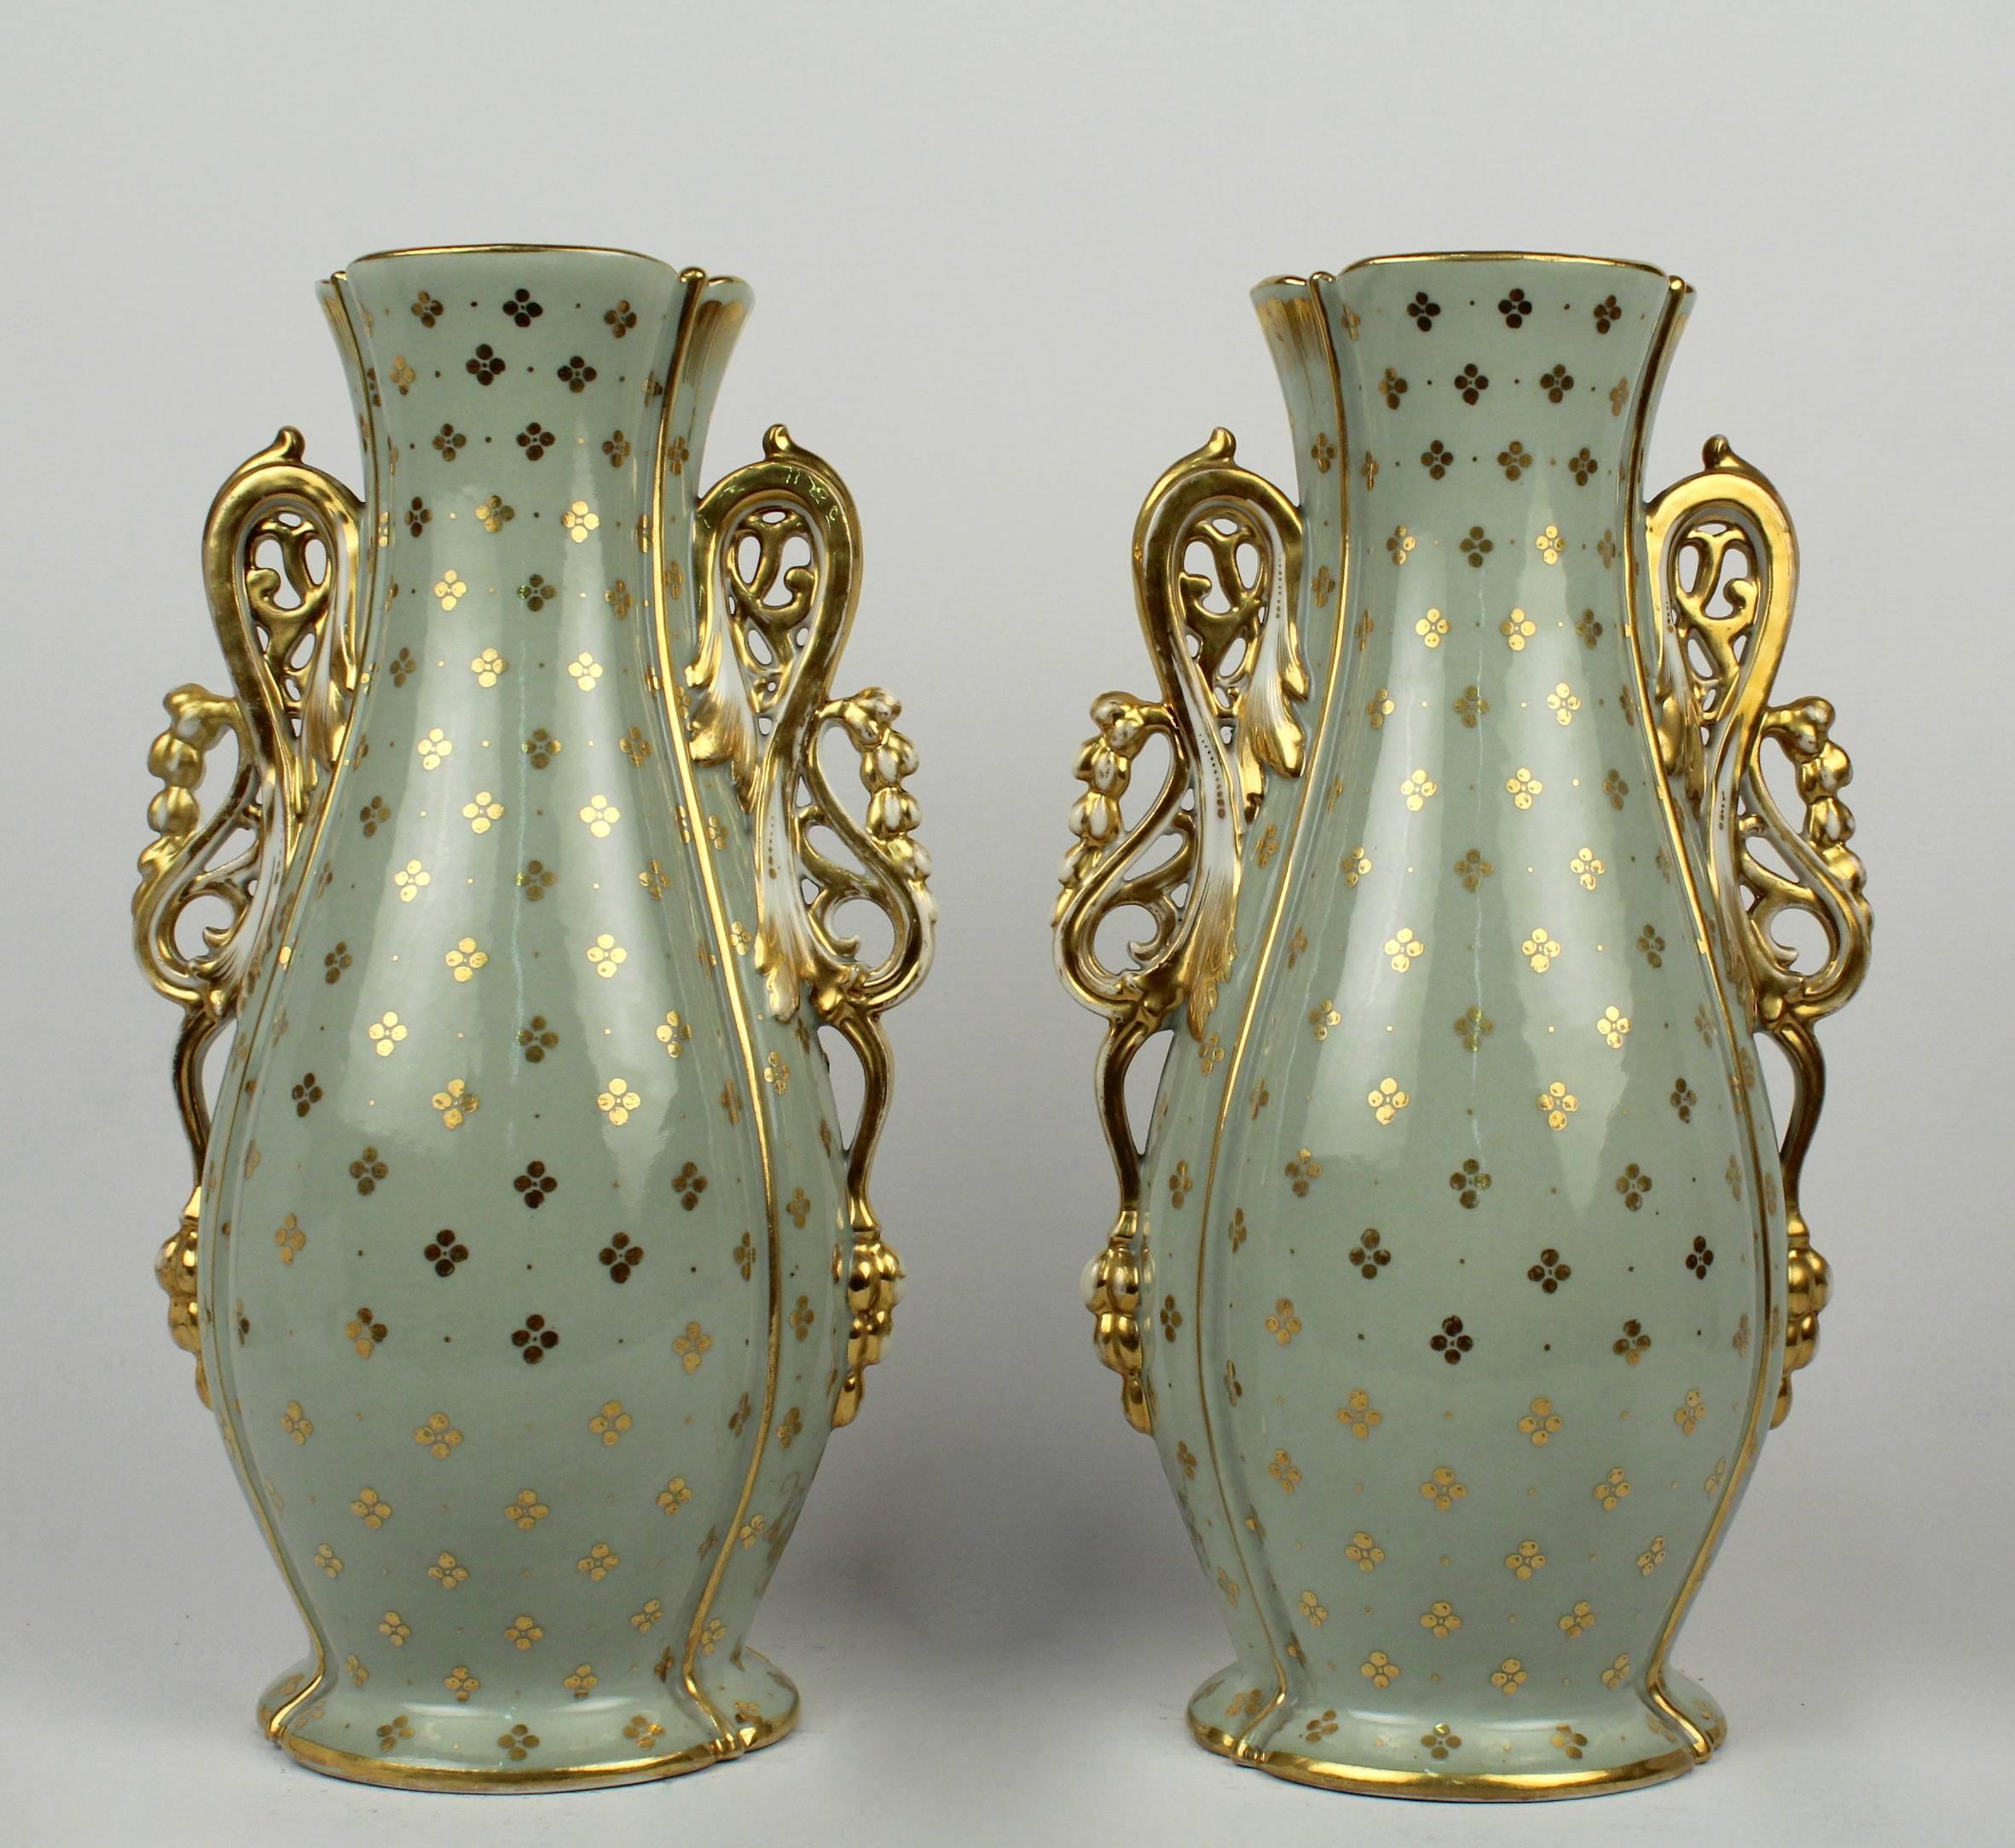 A Fine pair of 19th Century Old Paris porcelain vases. 

With central cartouches depict a hand-painted scenes with seated young maidens. 

Extensive gilding to the pale green ground.

Height: circa 13 1/4 in.

Items purchased from David Sterner